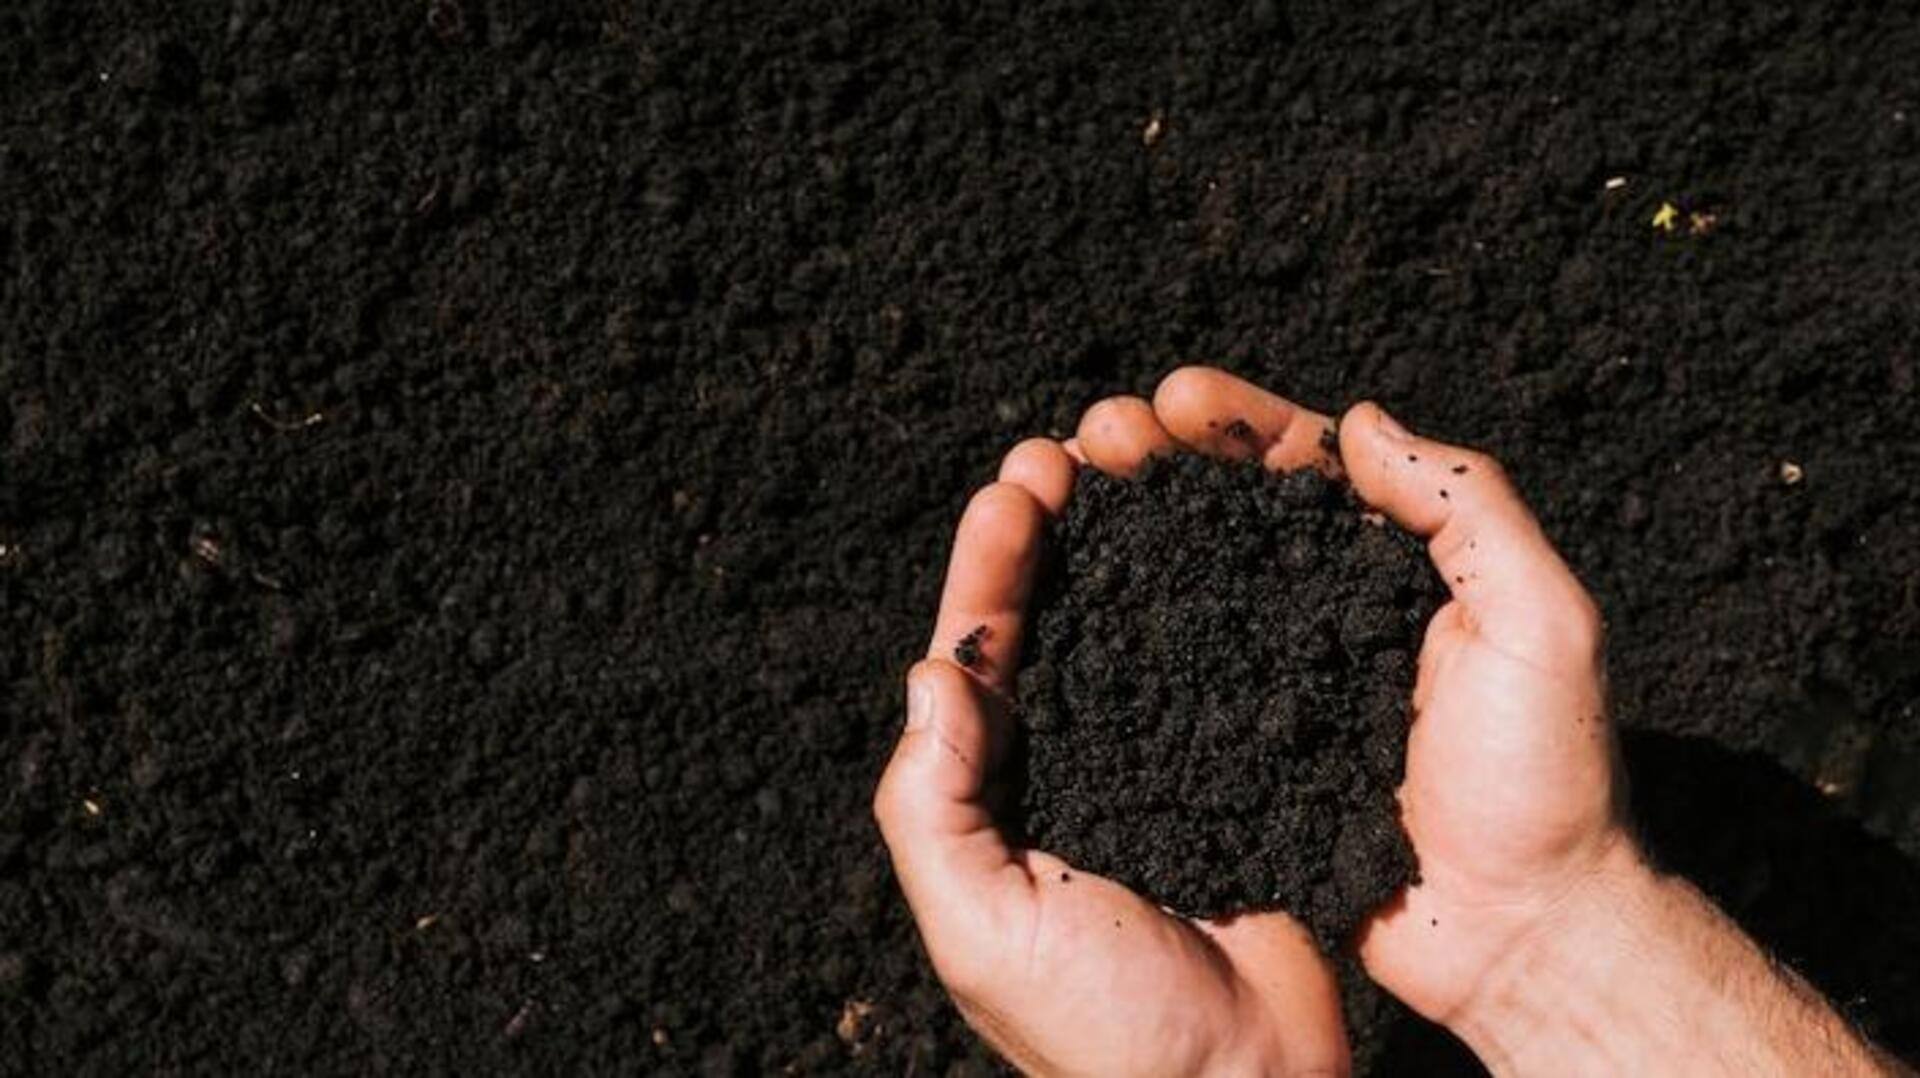 Two-thirds of all species live in the soil: Study